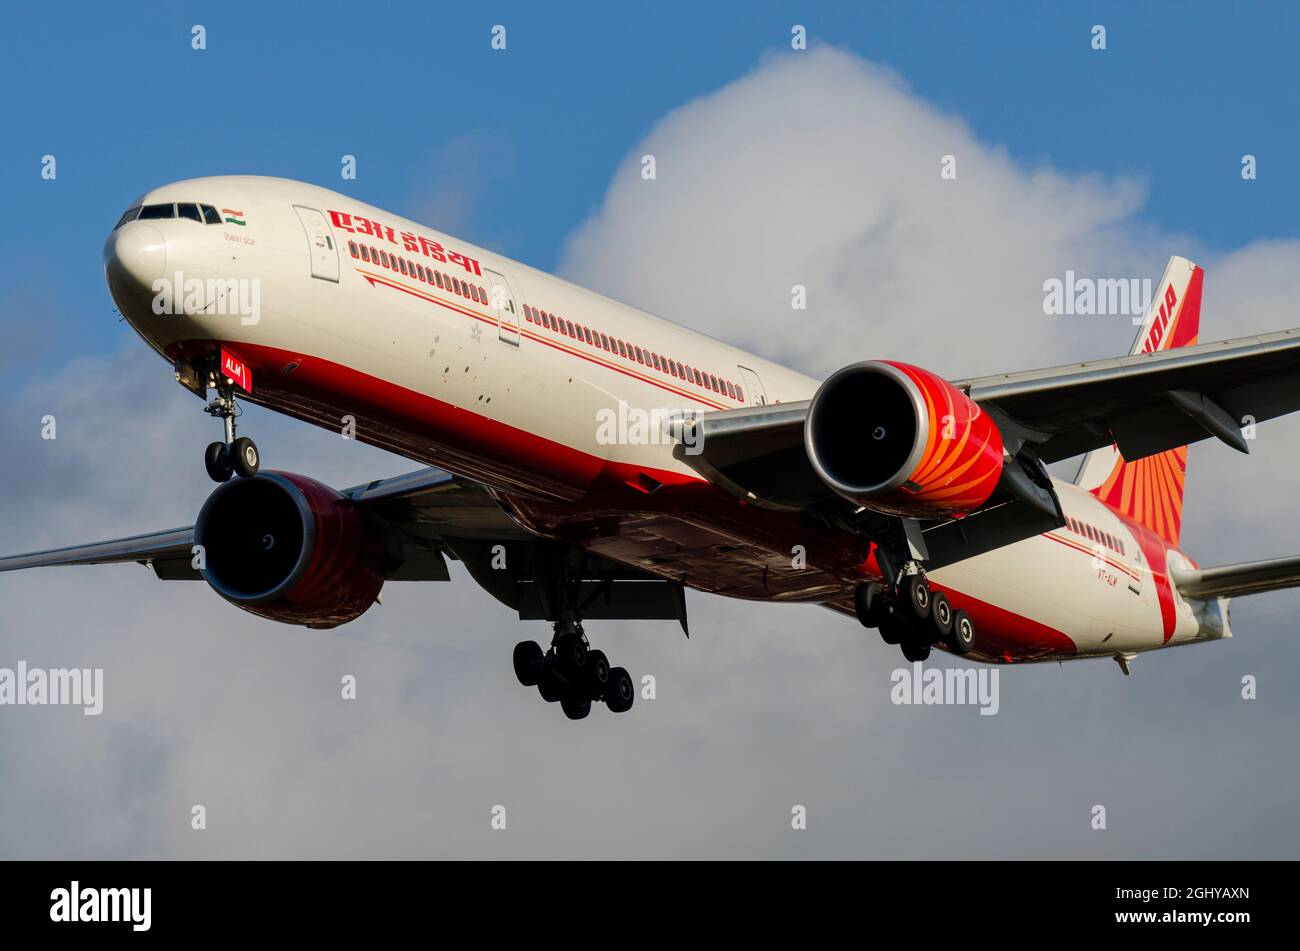 Air India Boeing 777 jet airliner plane VT-ALM on finals to land at London Heathrow Airport, UK. Indian flag carrier airline Stock Photo